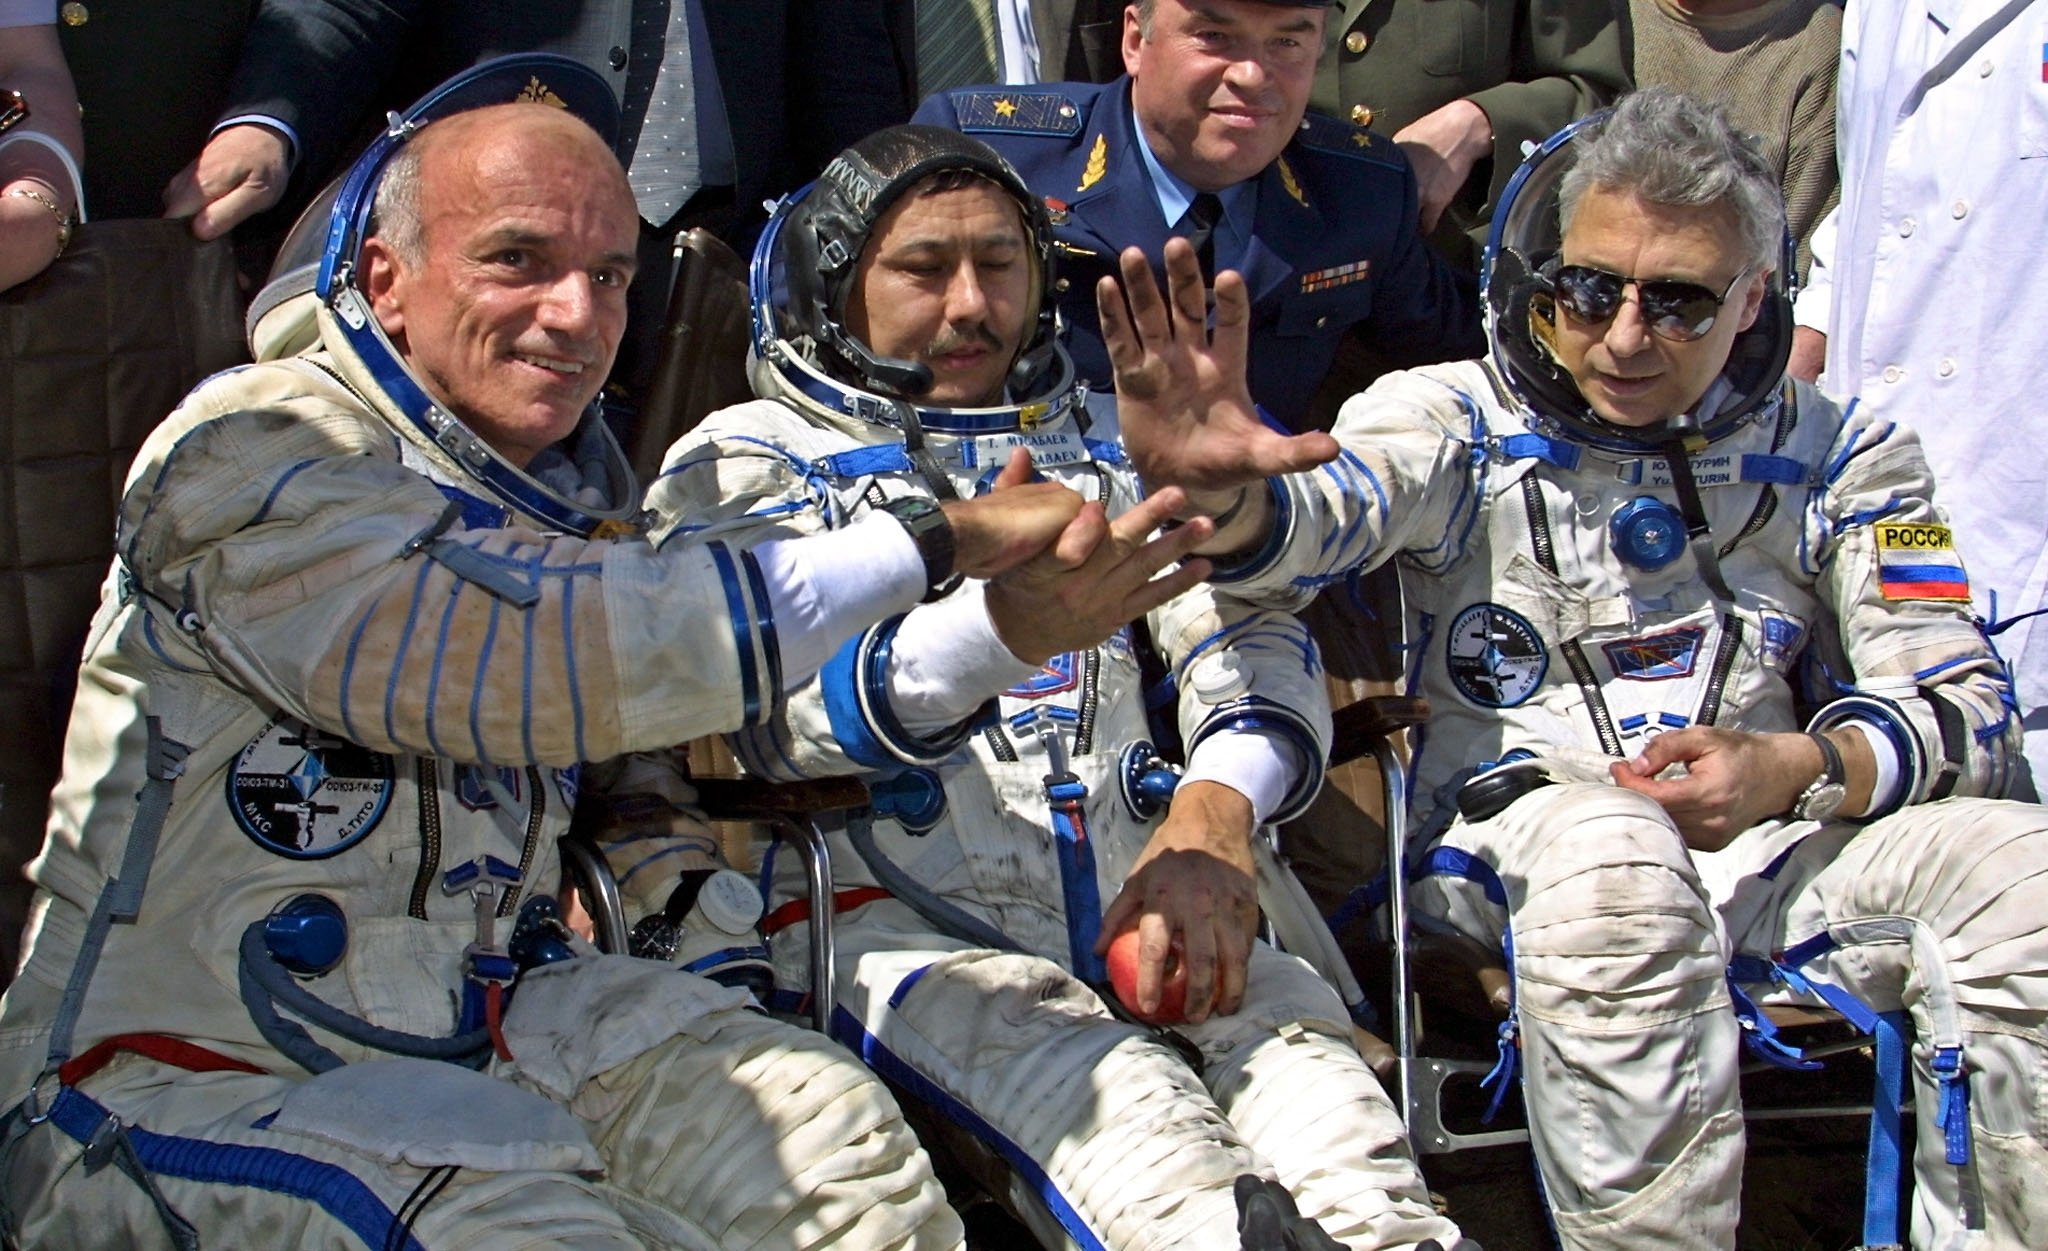 U.S. space tourist Dennis Tito (L) shakes hands with his crew members Talgat Musabayev (C) and Yuri Baturin (R) after their landing near the Kazakh town of Arkalyk, May 6, 2001. (Photo by Alexander NEMENOV / AFP)